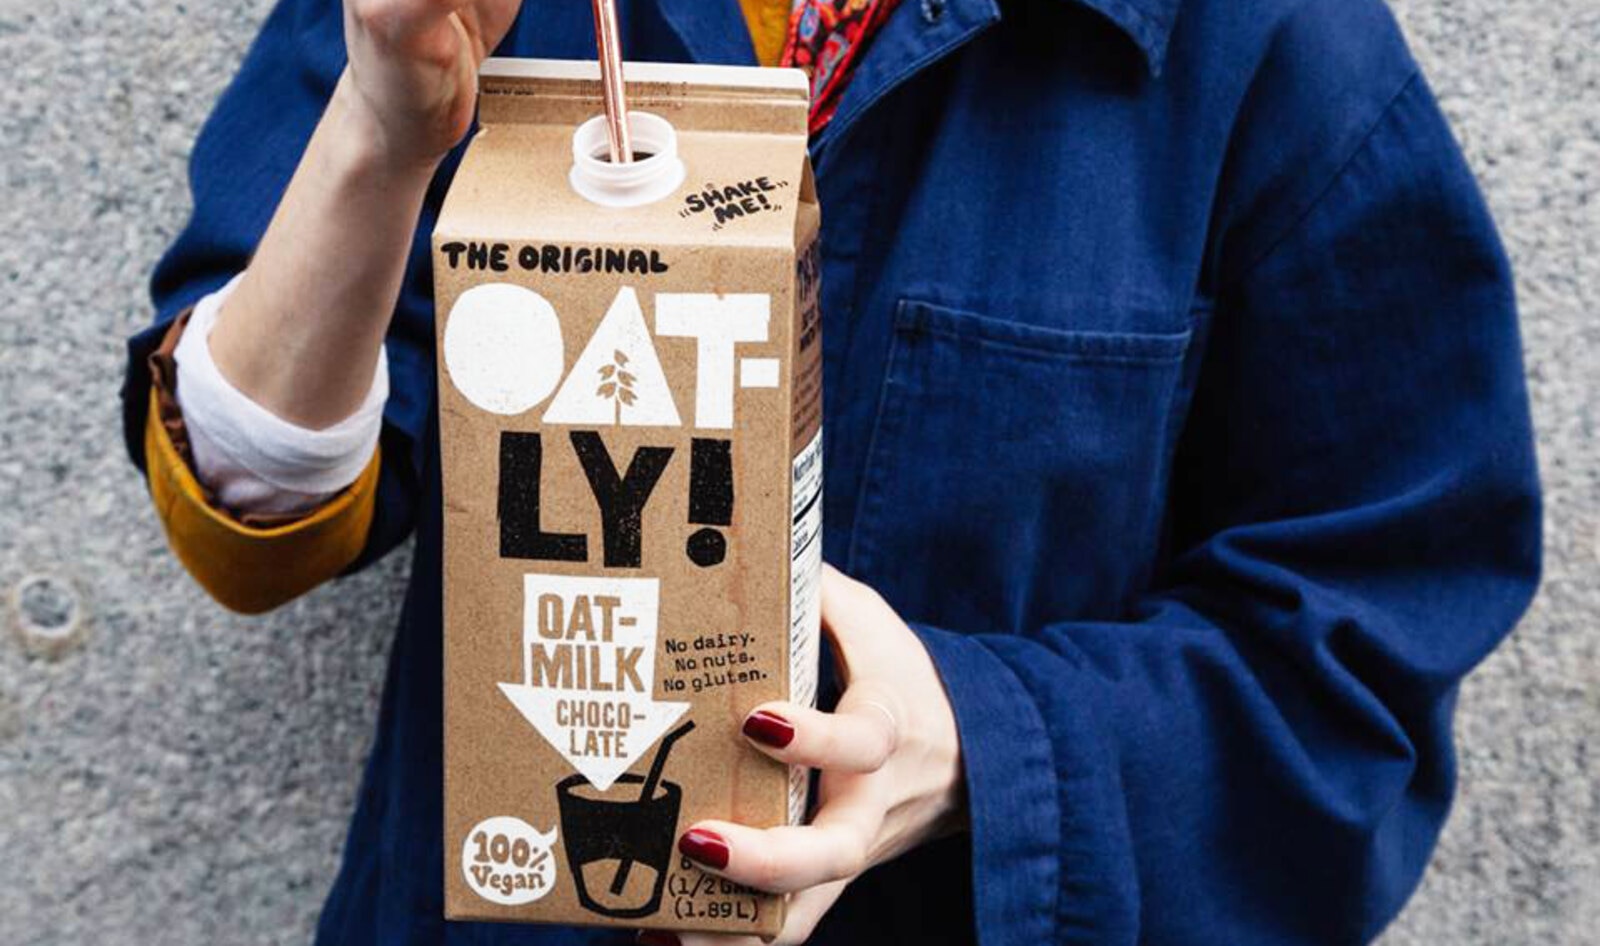 87 Percent of Consumers Are Not Confused By Vegan Milk Labels